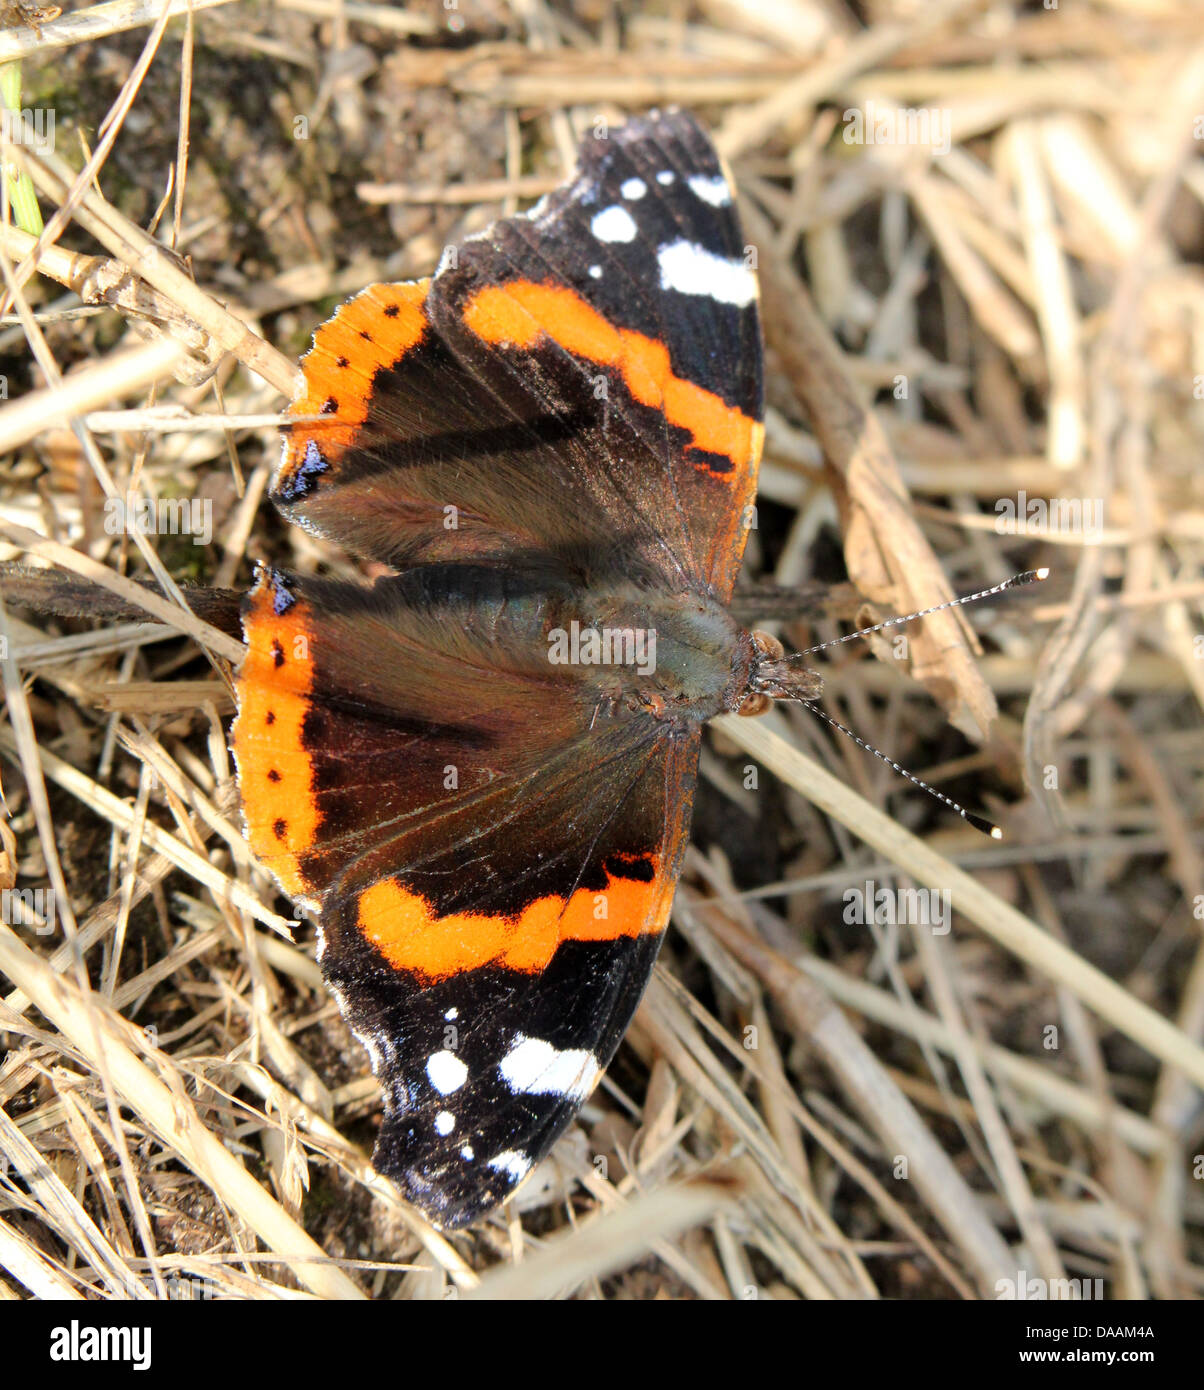 Red admiral butterfly (vanessa atalanta) on the ground among dry brown grasses Stock Photo